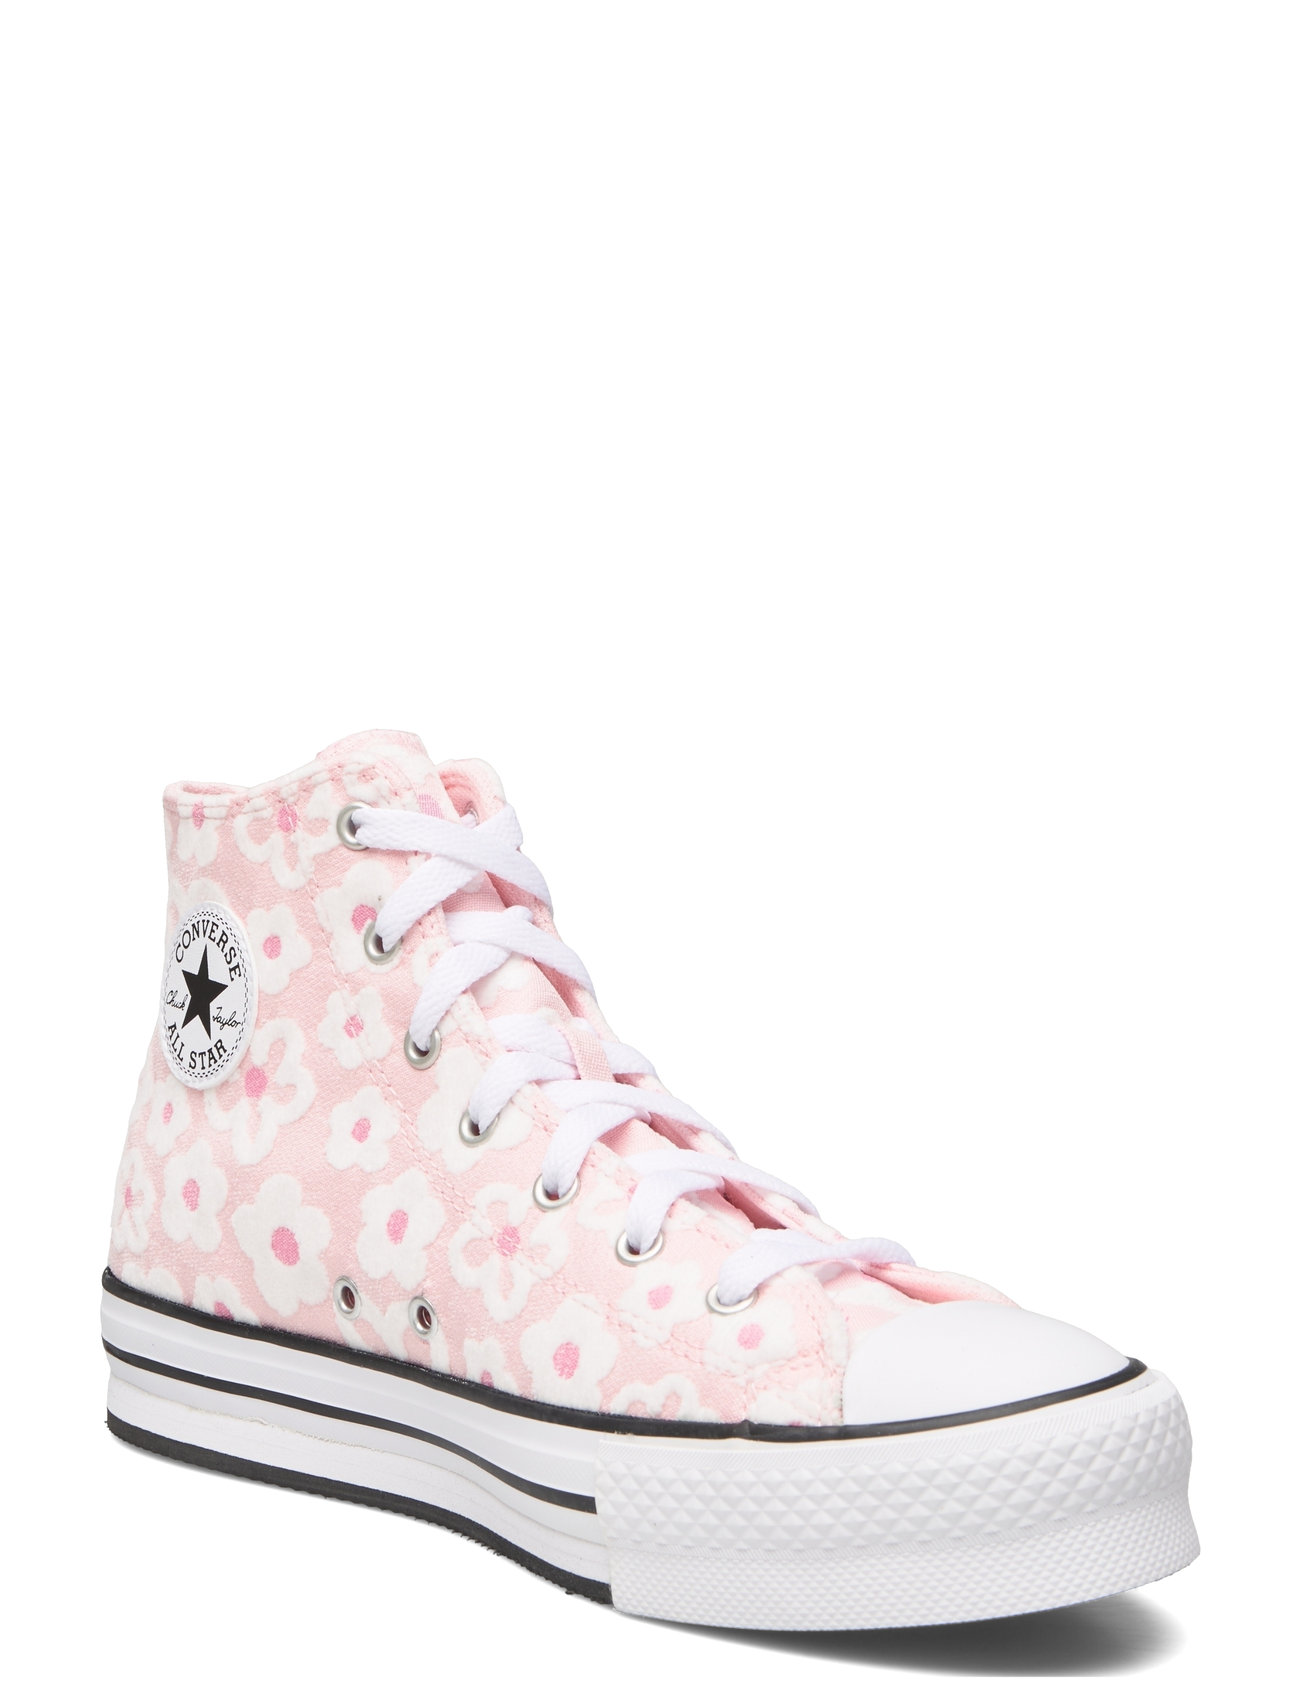 Chuck Taylor All Star Eva Lift Sport Sneakers High-top Sneakers Pink Converse